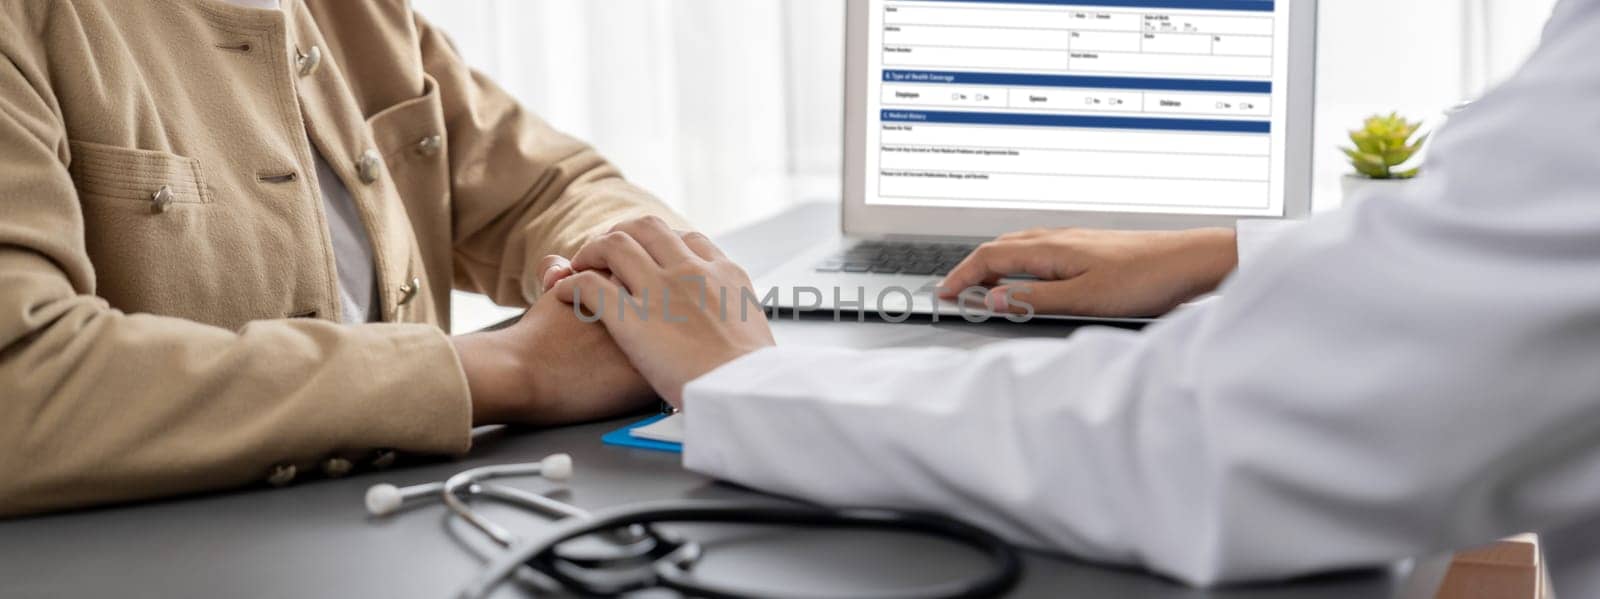 Doctor show medical diagnosis report and providing compassionate healthcare consultation while holding young patient hand for being supportive and professional in doctor clinic office. Neoteric